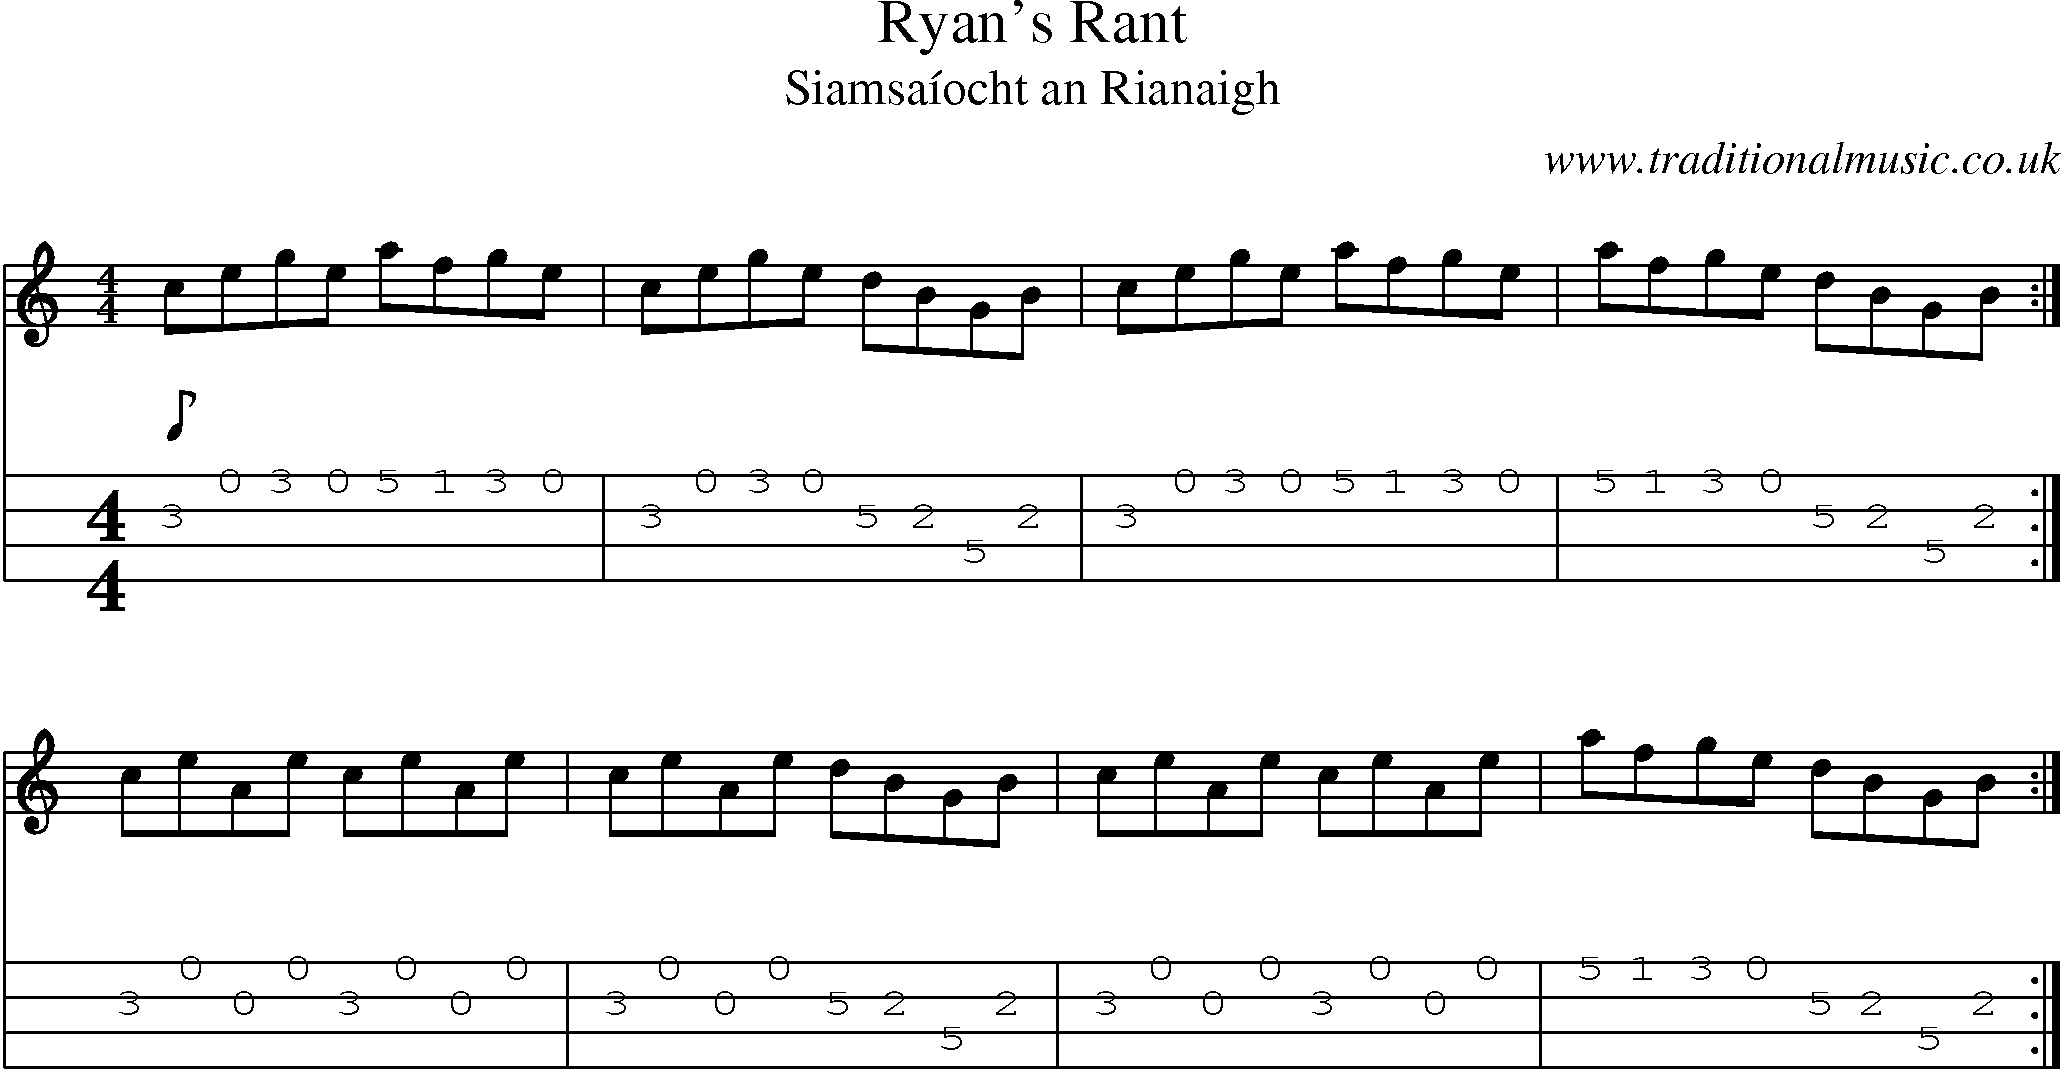 Music Score and Mandolin Tabs for Ryans Rant